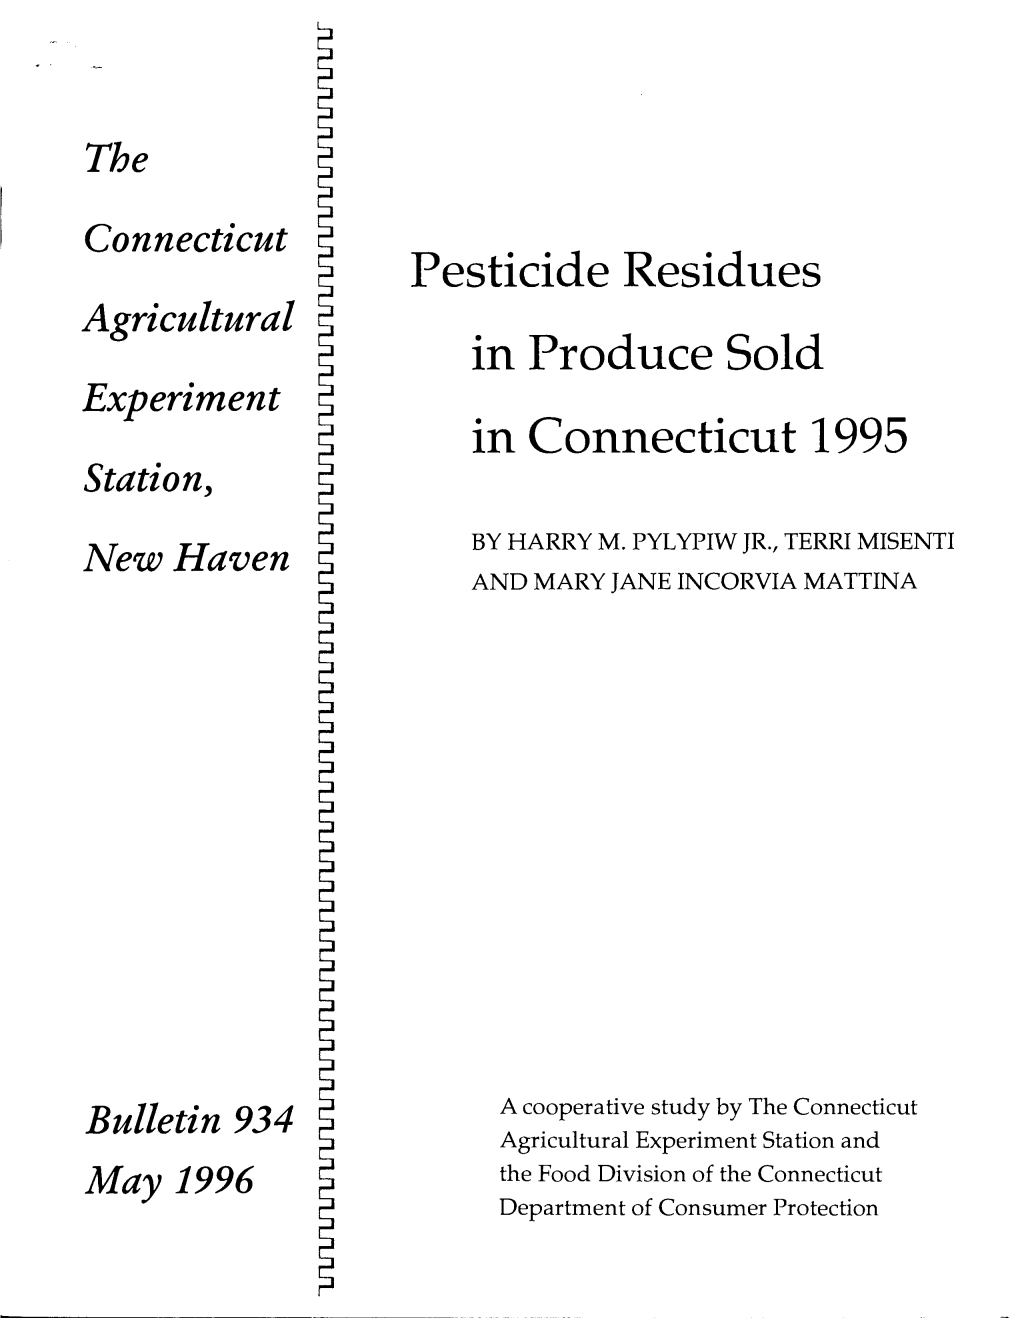 Pesticide Residues in Produce Sold in Connecticut 1995 ~ by HARRY M